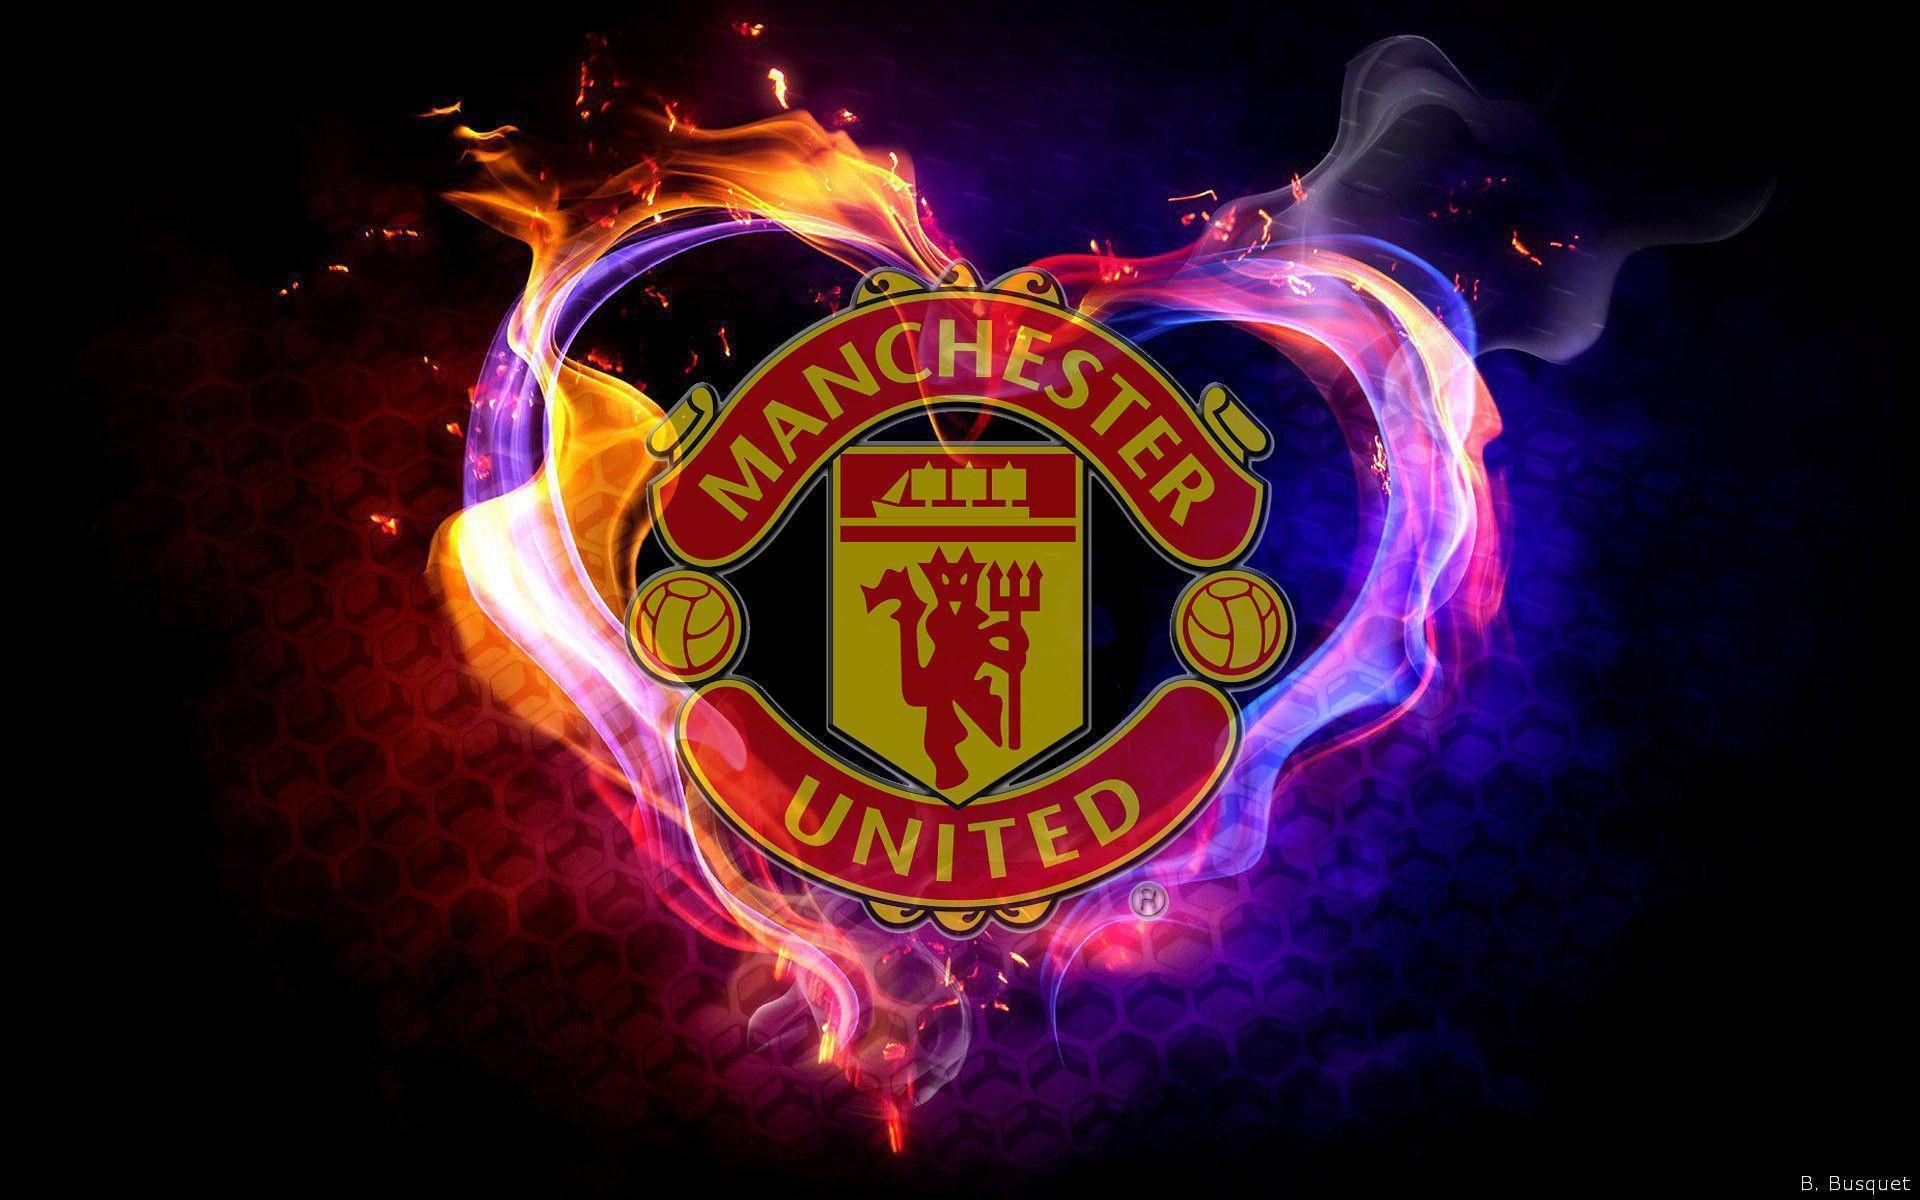 P Manchester United Wallpaper K Manchester United Fc Wallpapers